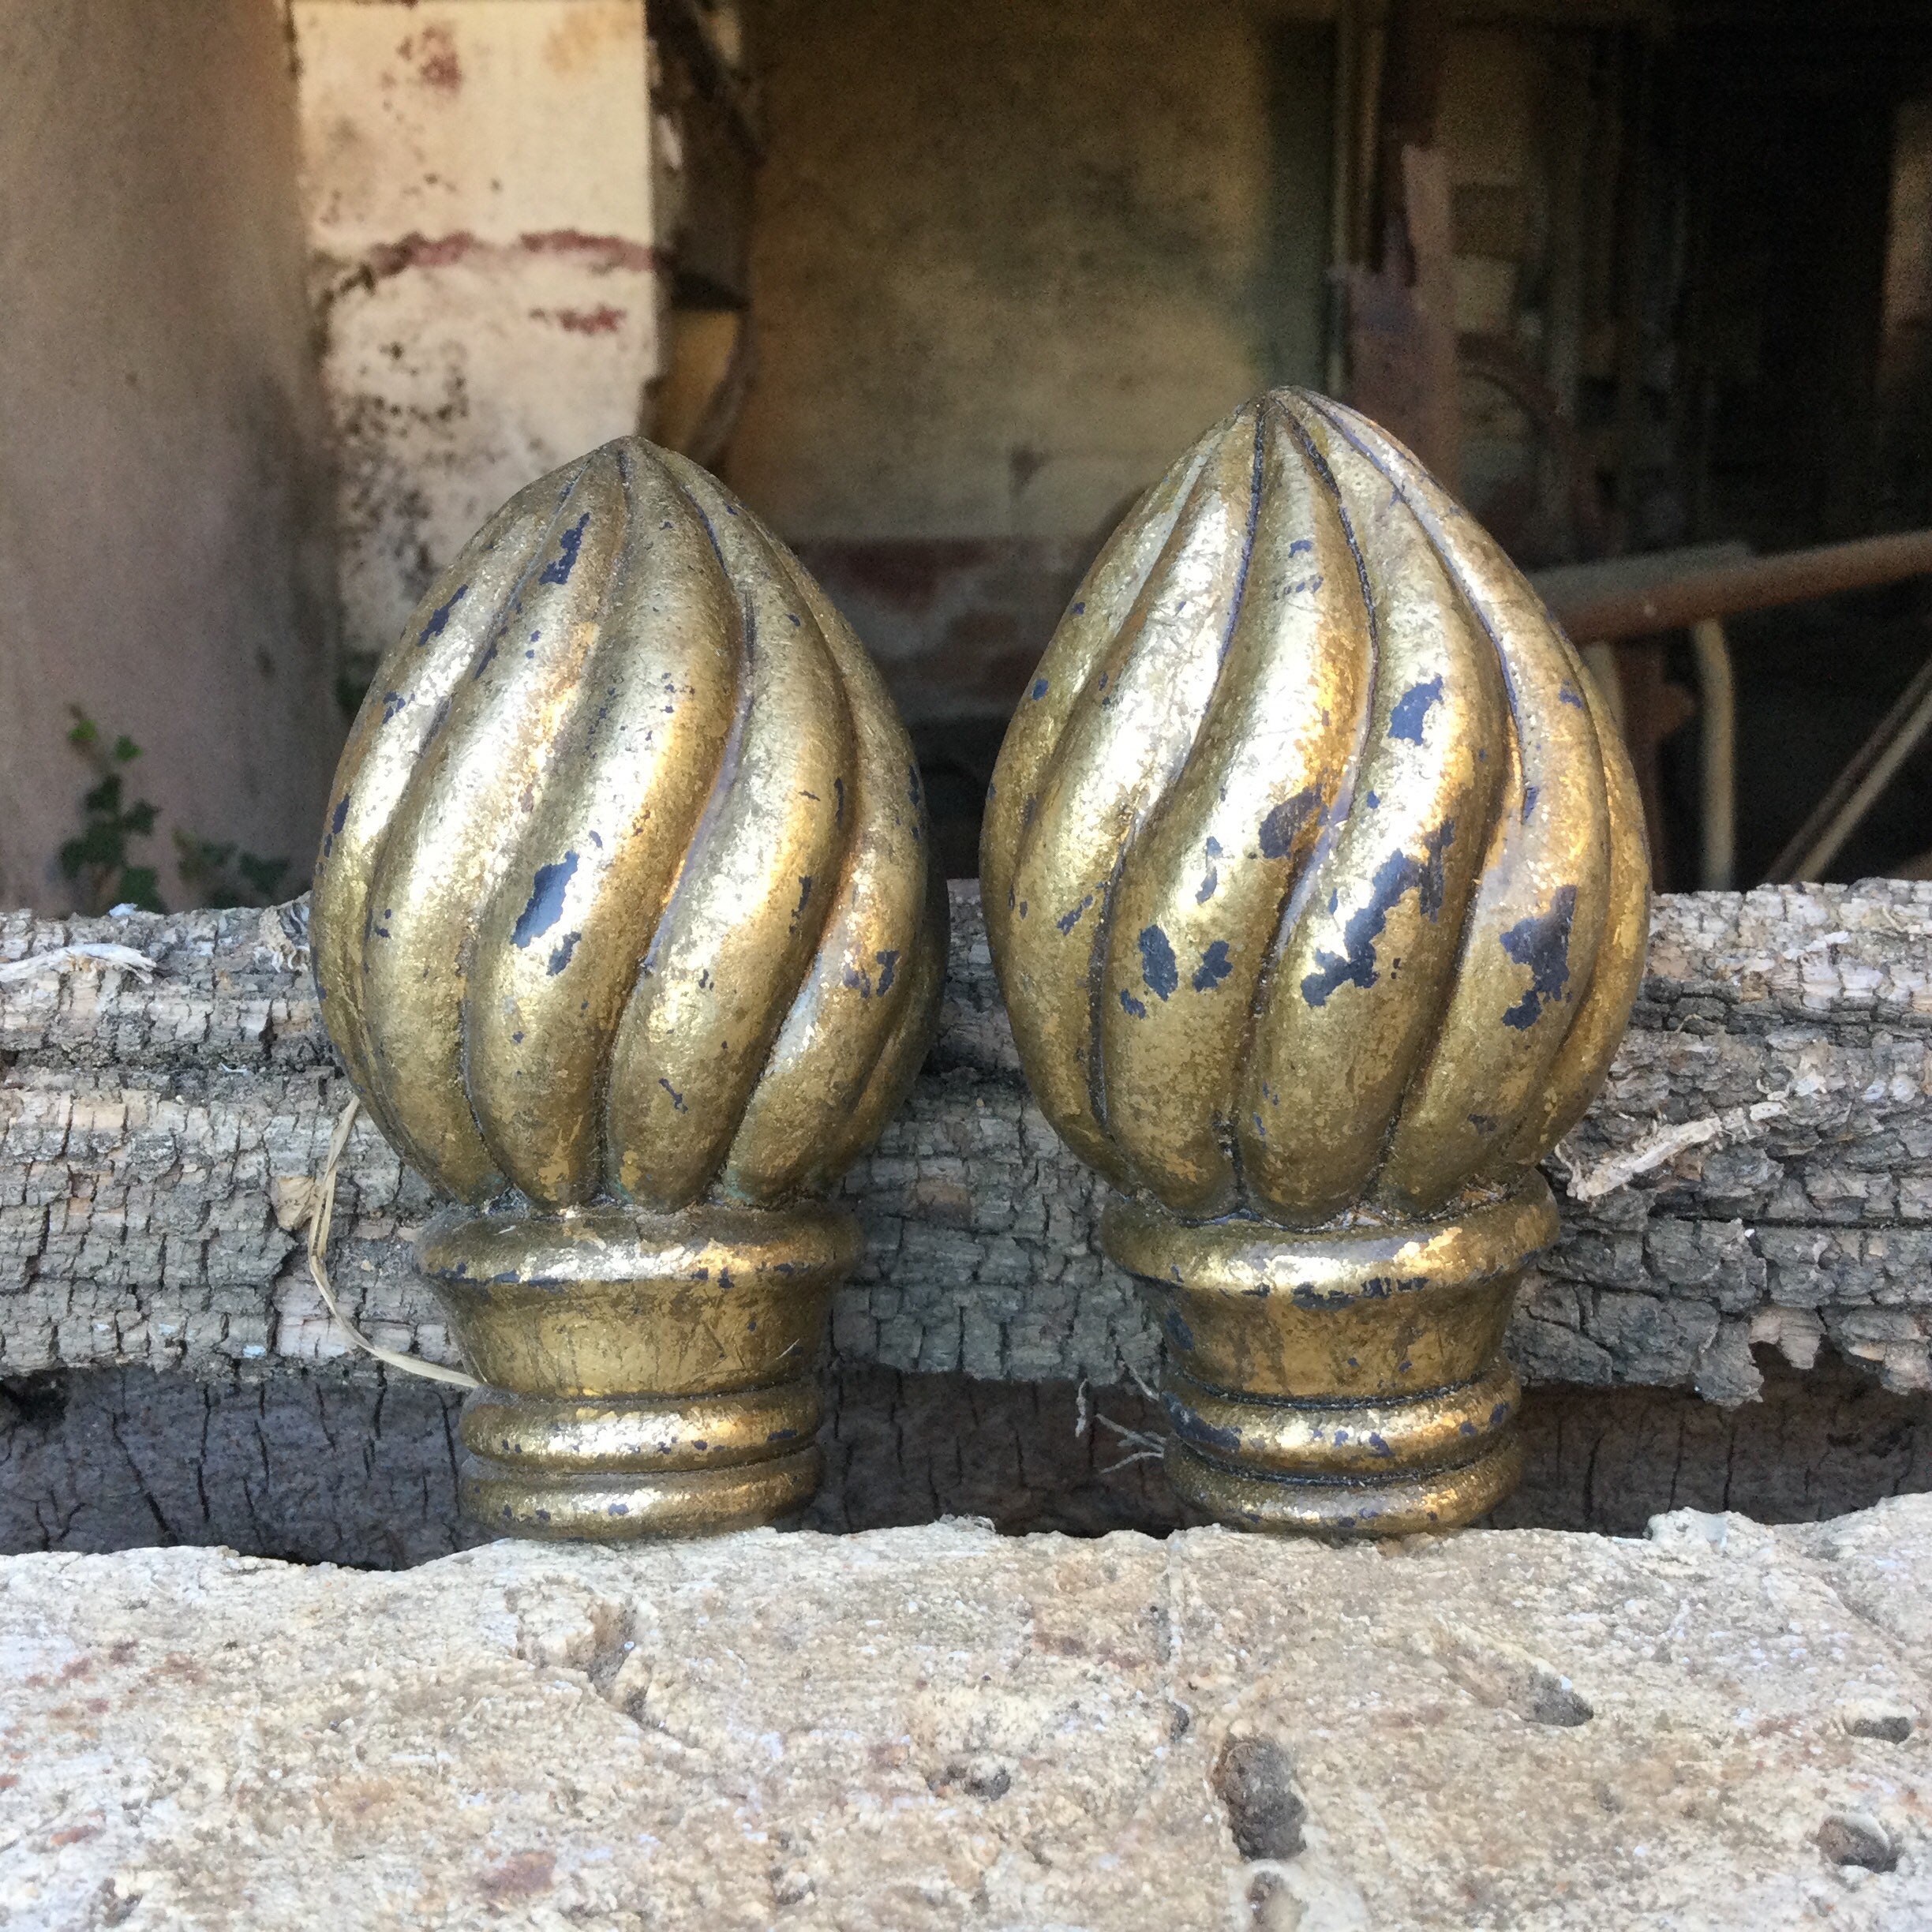 Vintage Carved Wood Finials Toppers for Furniture Curtain Rods.  Architectural Decor Stairwell or Drapery Hardware Repurpose –set of 2